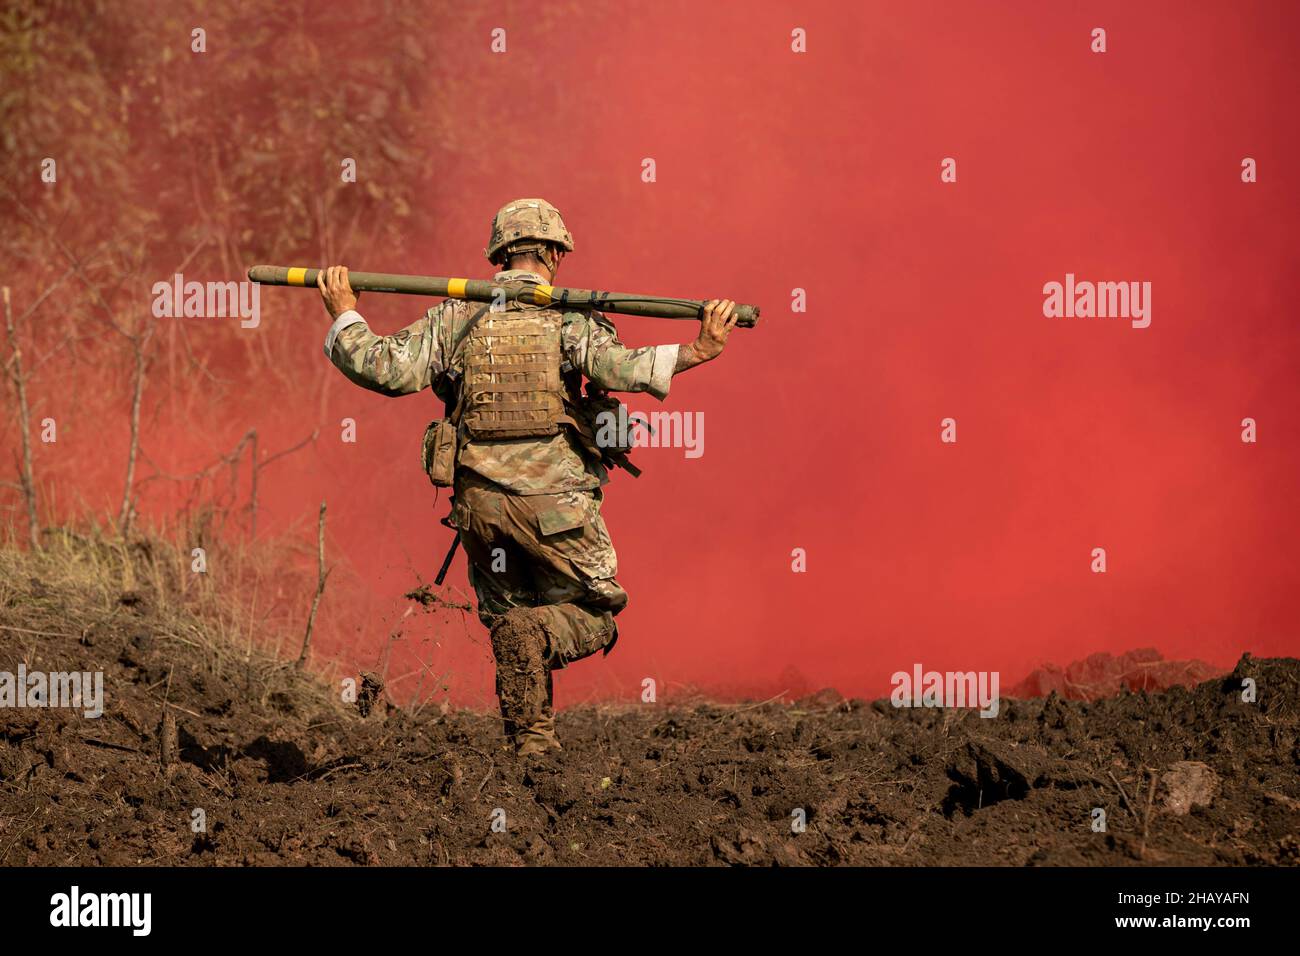 Baturaja, Indonesia. 12th Aug, 2021. A U.S. Army Soldier with Task Force Warrior runs through red smoke with a Bangalore torpedo during a live fire range at Baturaja Training Area, Indonesia, on August 12, 2021. Garuda Shield 21 is a two-week joint-exercise between the USA Army and Tentara Nasional Indonesia (TNI-AD Indonesia Armed Forces). The purpose of this joint-exercise is to enhance and enrich the jungle warfare ability of both the U.S. Army and Indonesian Army. Credit: Rachel Christensen/U.S. Army/ZUMA Press Wire Service/ZUMAPRESS.com/Alamy Live News Stock Photo